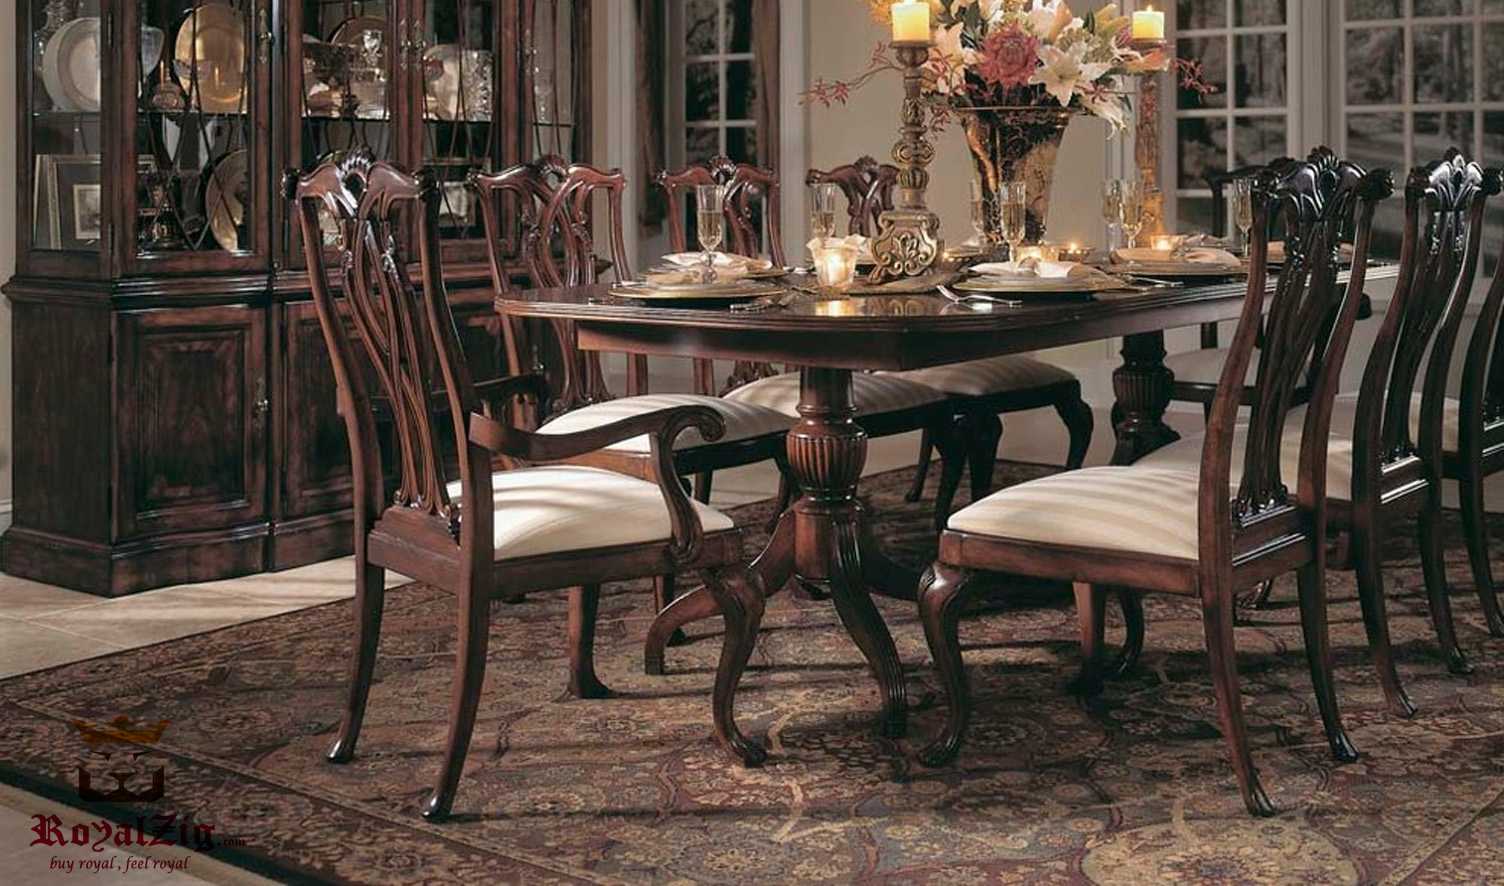 8 Seater Antique Dining Table in Classic Style Teak Wood Carving- Carved in India Brand Royalzig Luxury Furniture 